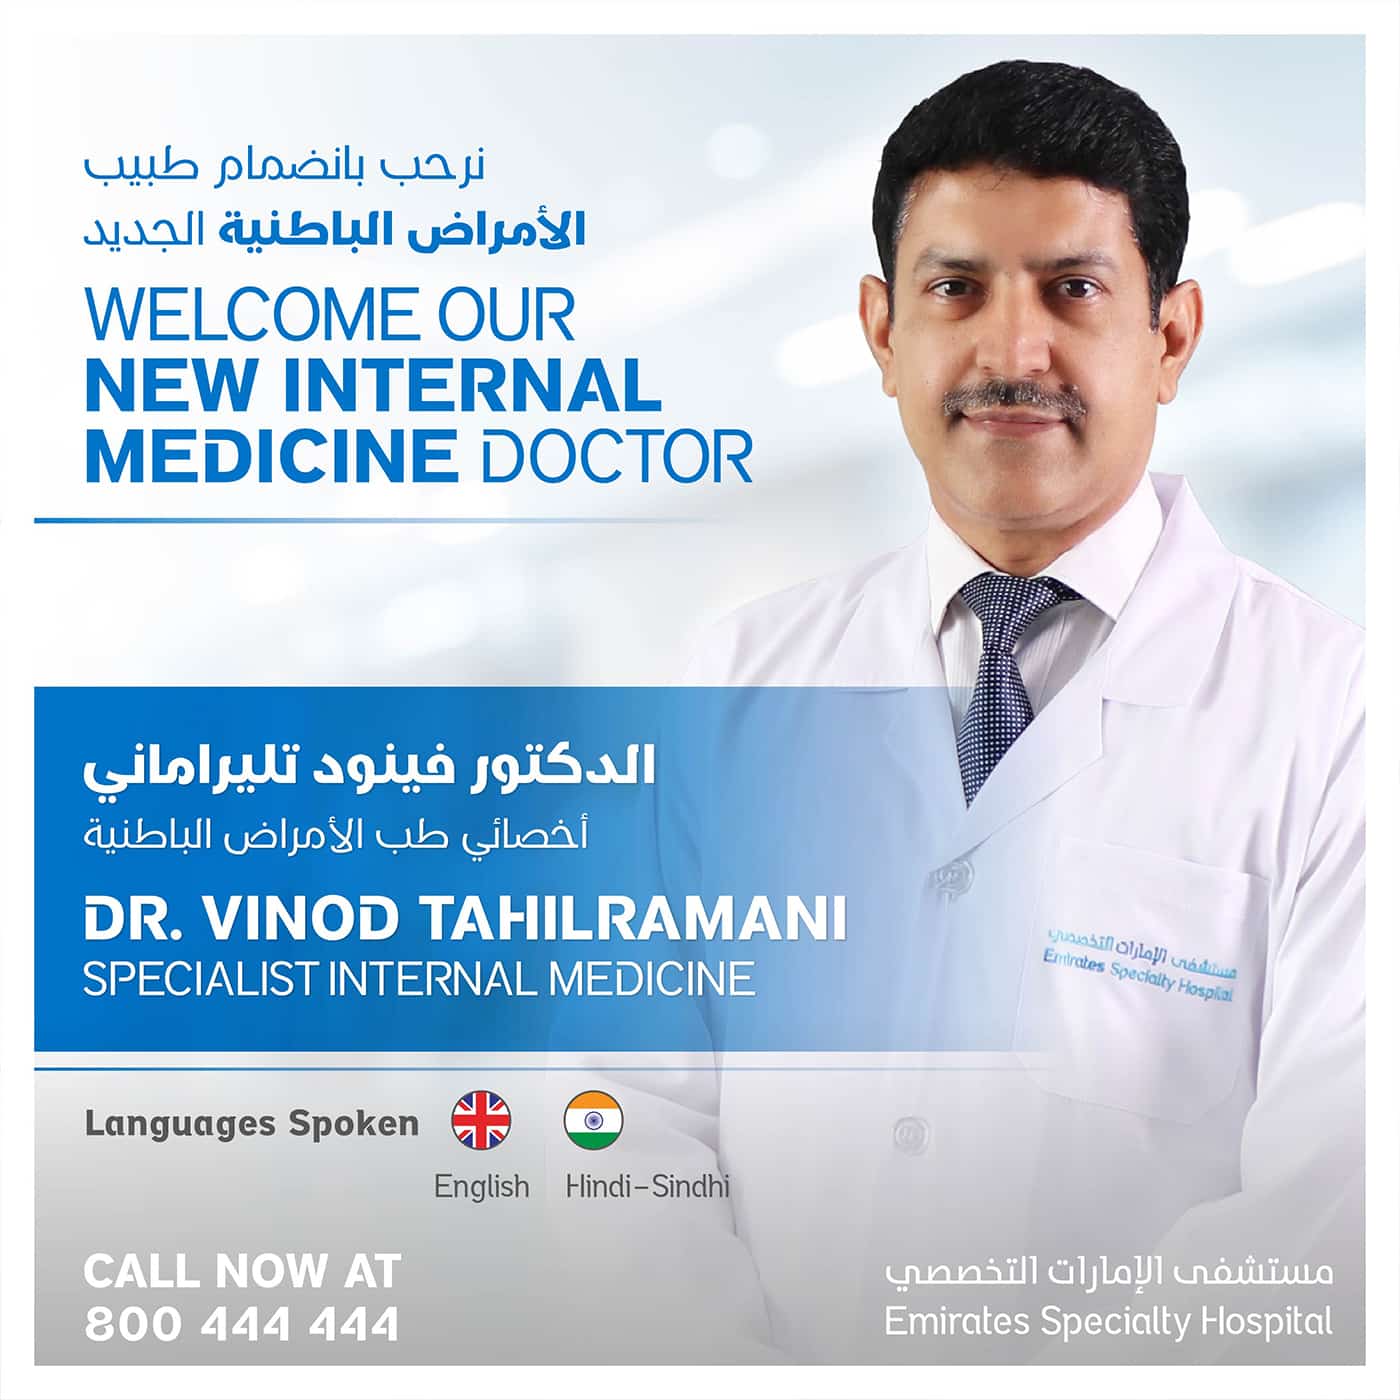 Dr. Vinod Tahilramani Specialist Internal Medicine will be available for consultations at Emirates Specialty Hospital - DHCC